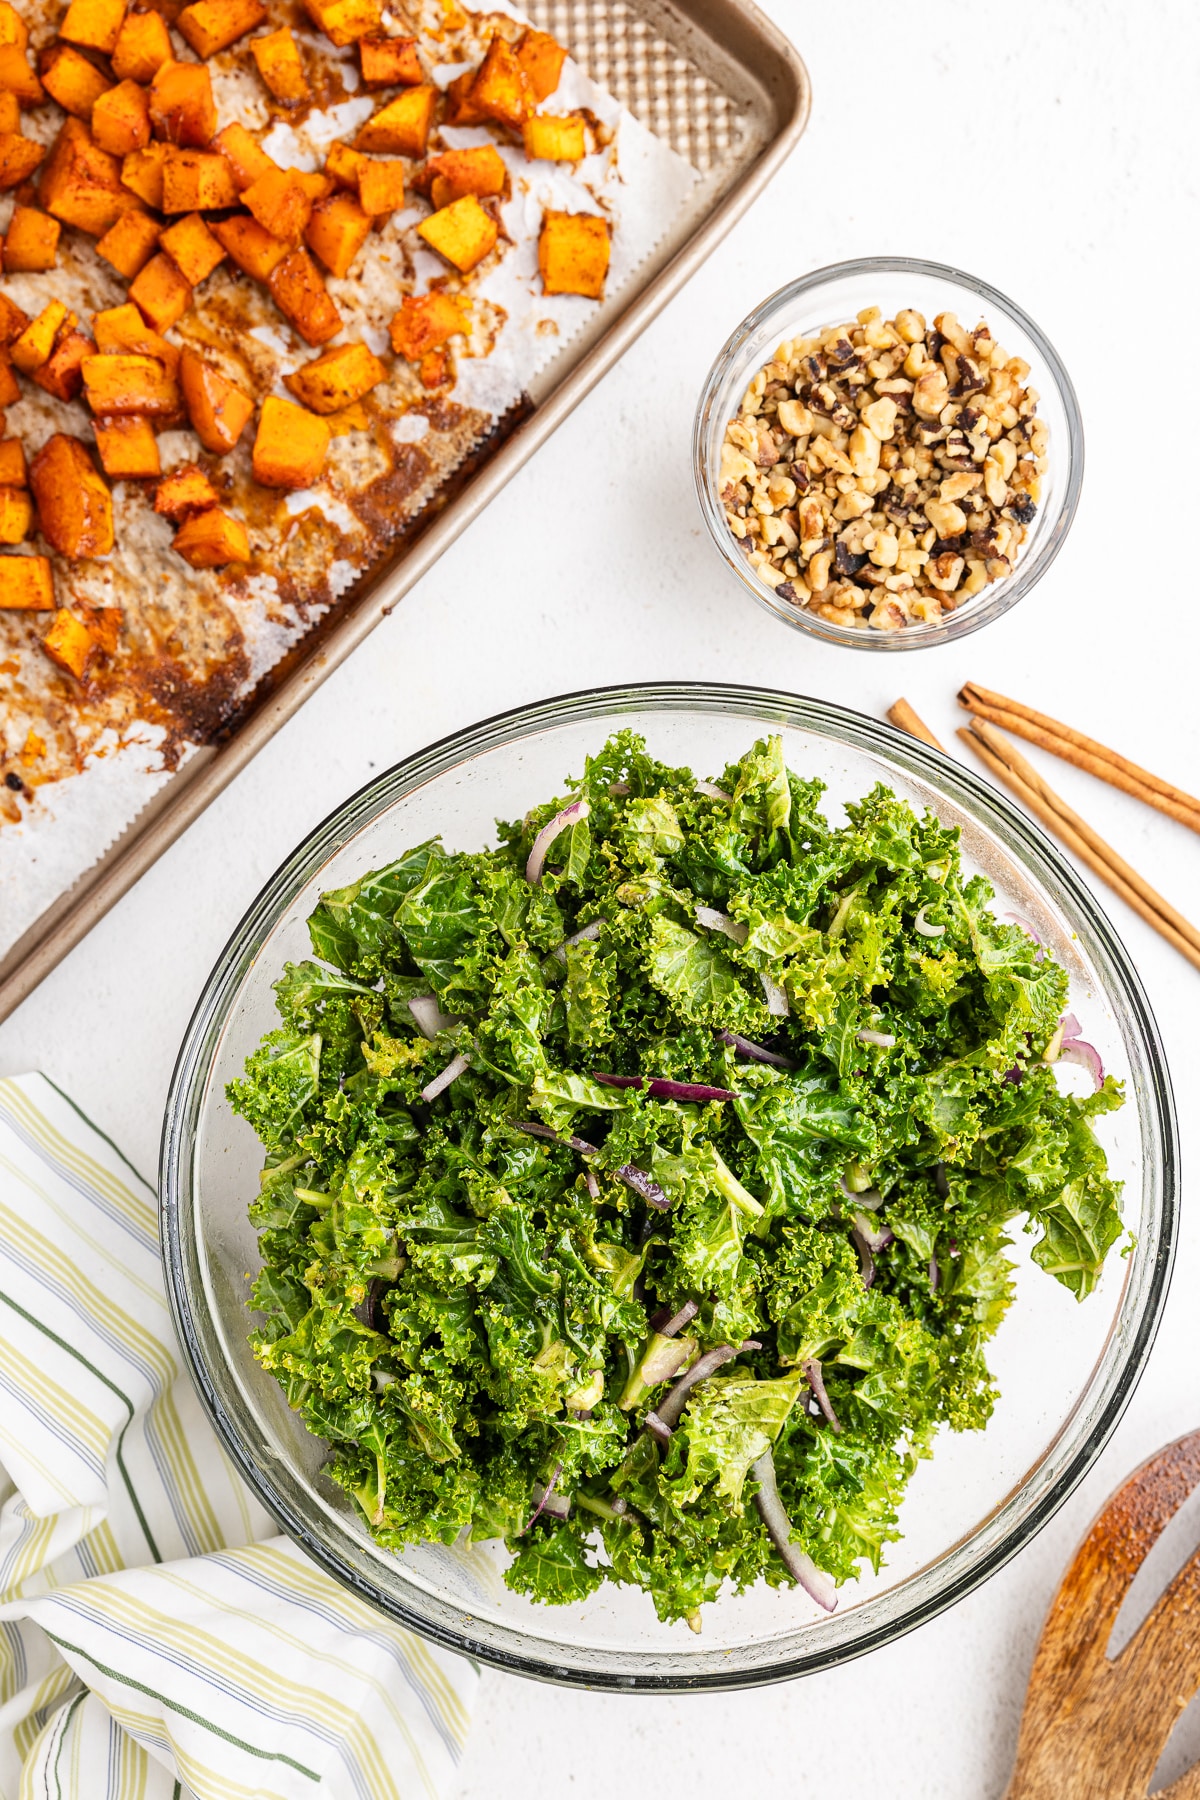 Overhead view of a large glass bowl full of baby kale and red onion tossed with an orange chili salad dressing next to a baking sheet full of roasted butternut squash cubes. There is also a small glass bowl full of chopped walnuts.